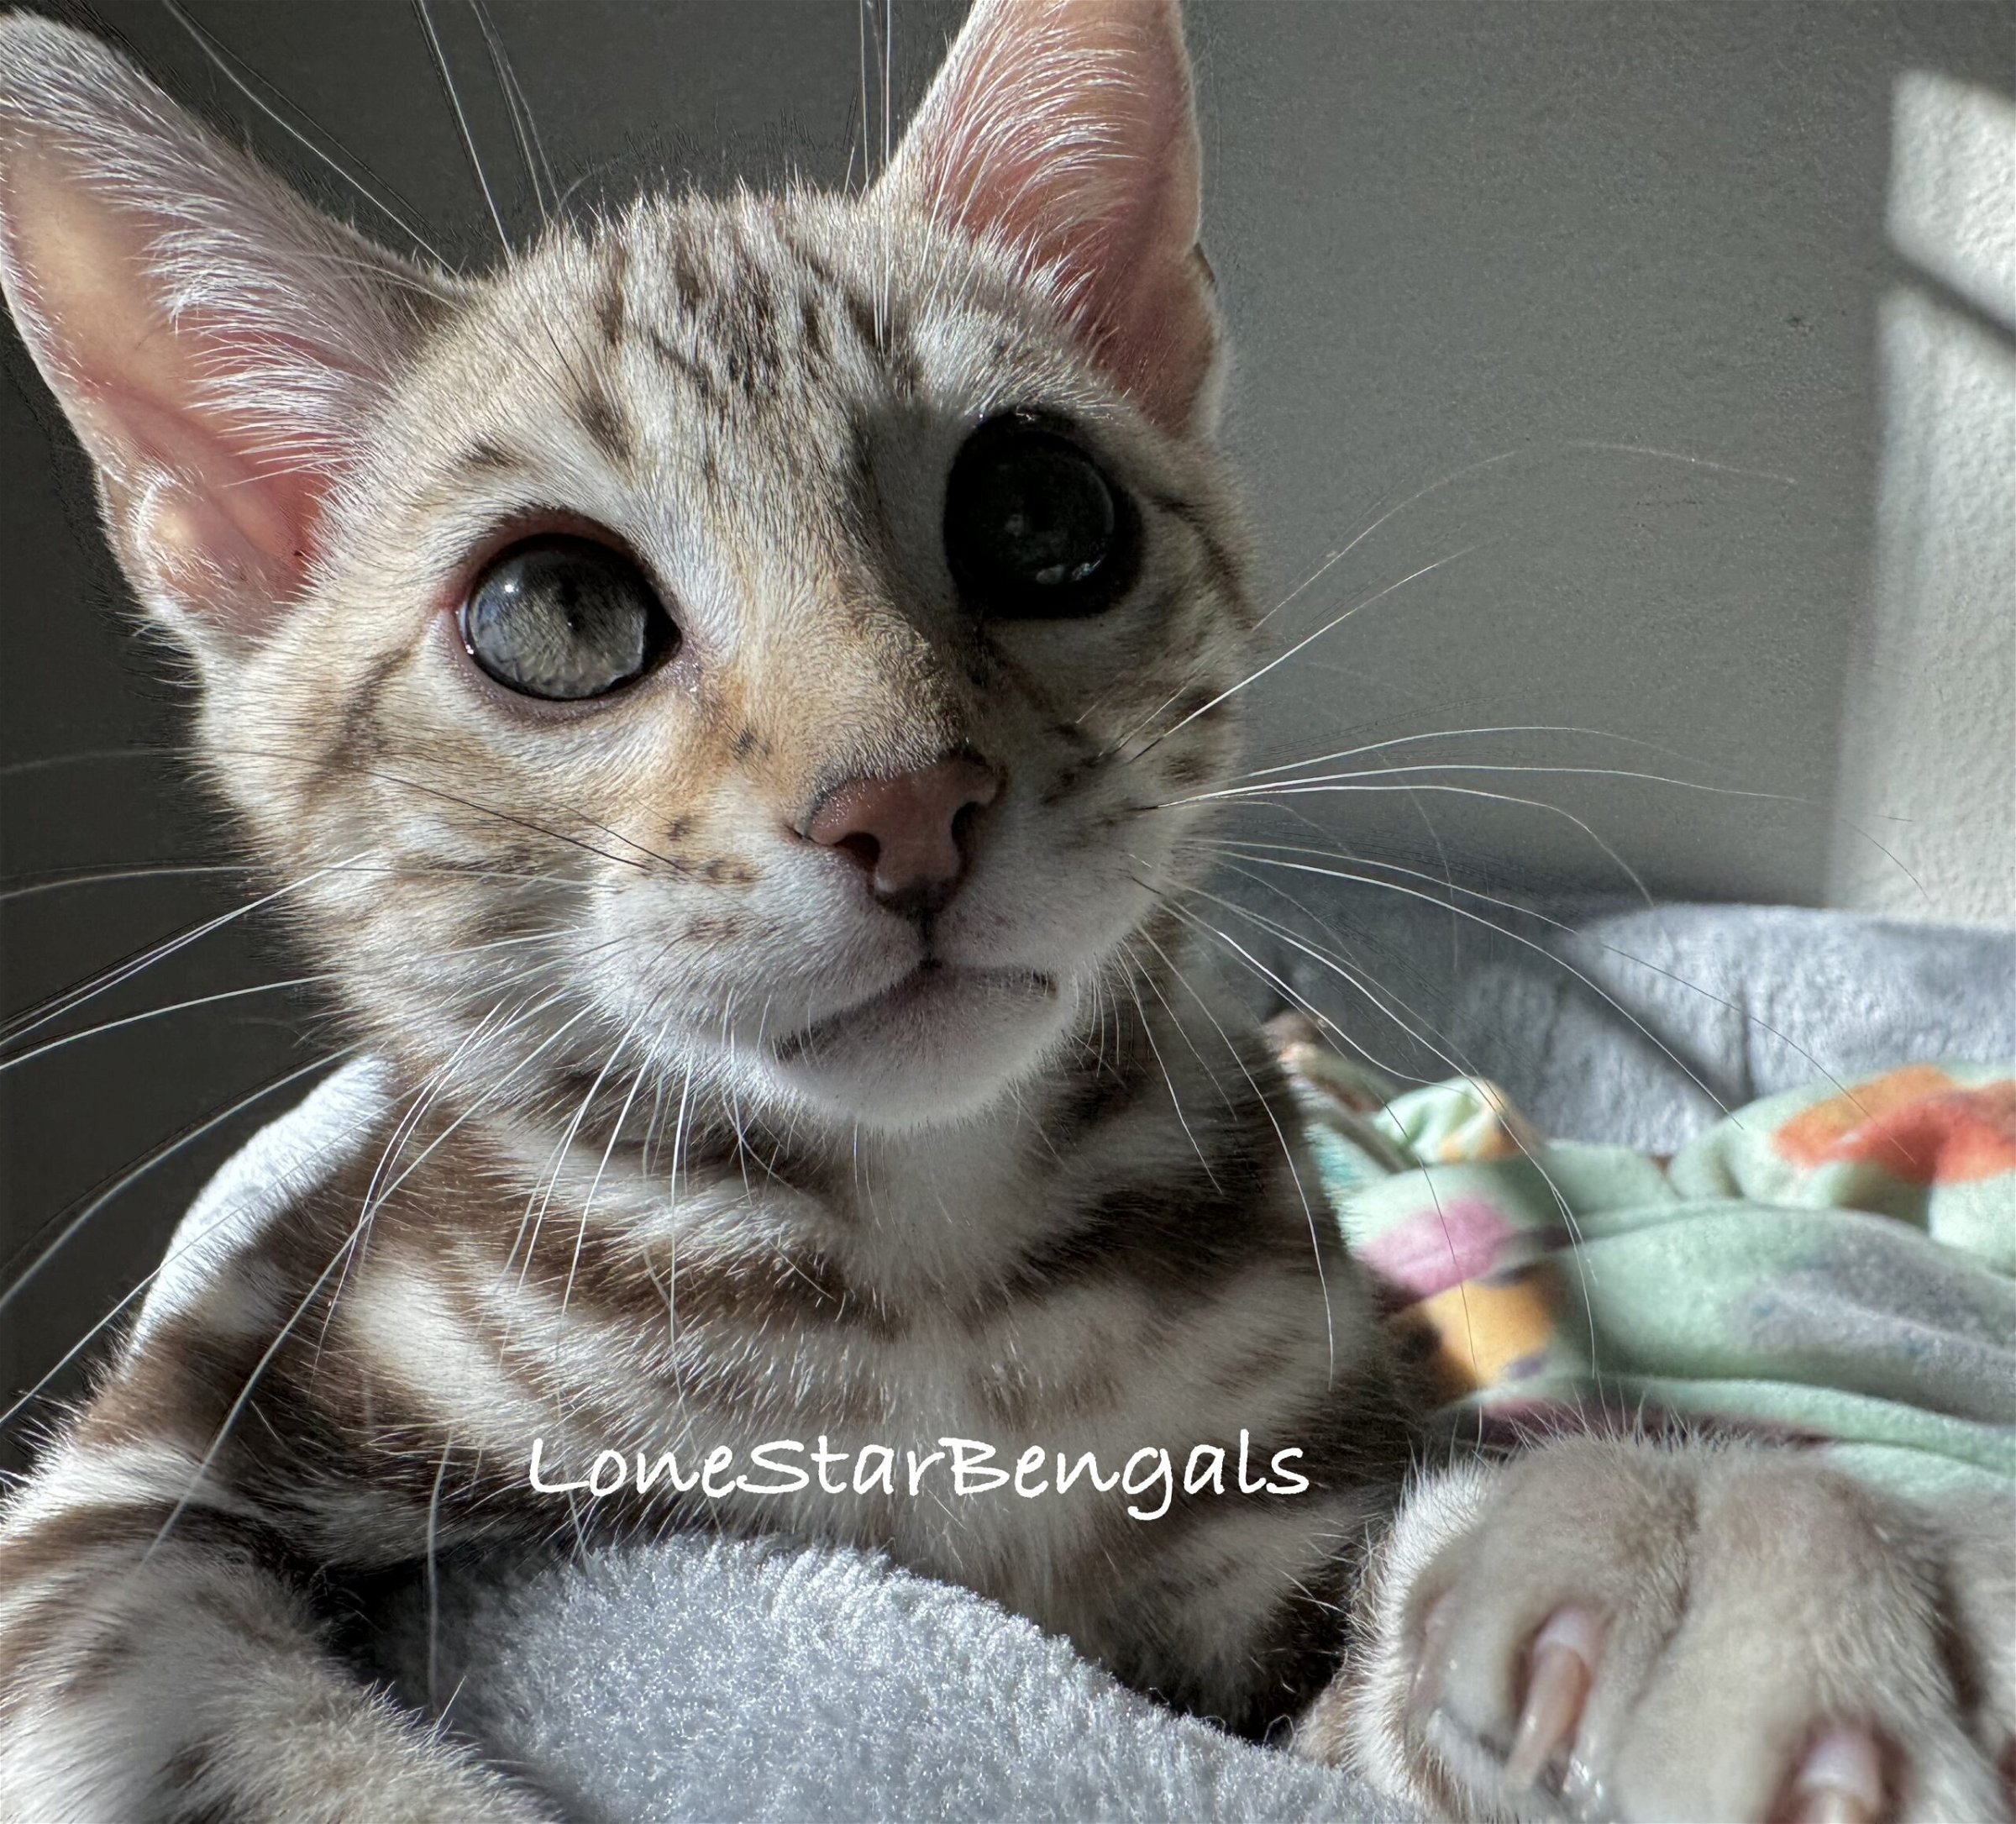 A Superior Quality Bengal kitten from Lone Star Bengal Cats, peacefully laying on a cozy blanket.